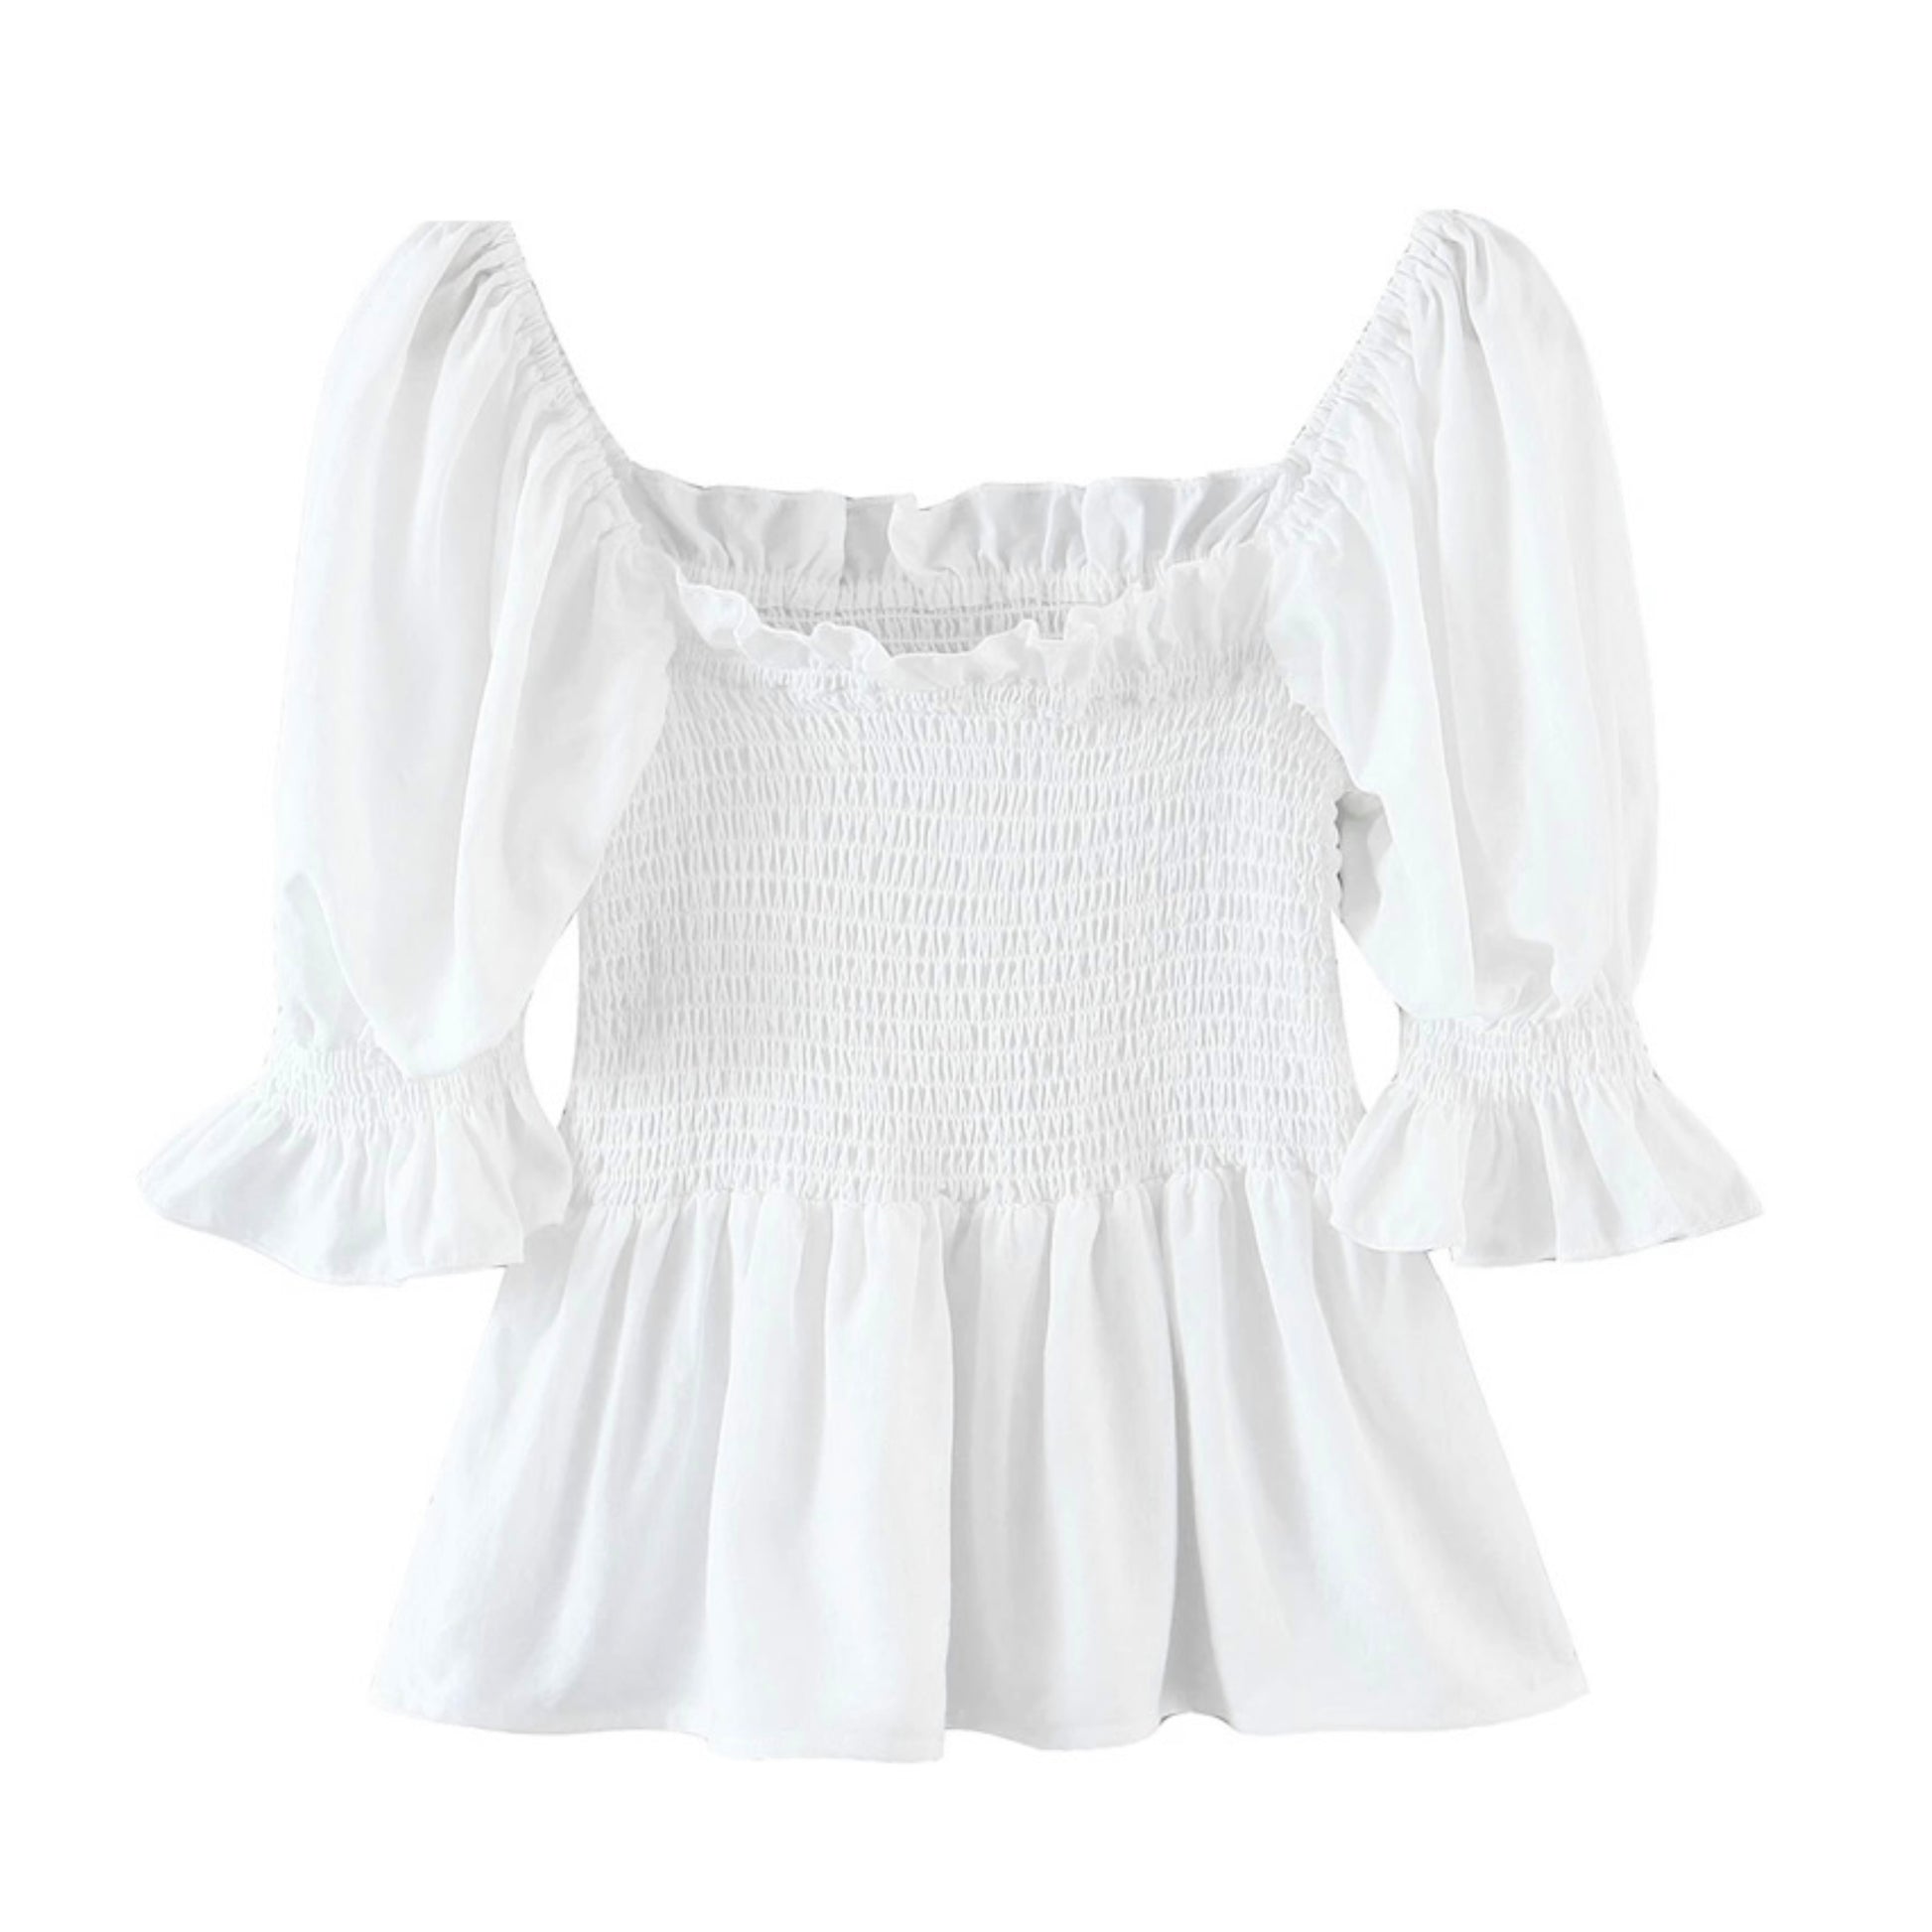 white-slim-fitted-smocked-shirred-bodice-fit-and-flare-ruffle-trim-short-puff-sleeve-square-neckline-tiered-linen-boho-bohemian-full-length-hip-camisole-top-blouse-shirt-women-ladies-teens-tweens-chic-trendy-spring-2024-summer-elegant-casual-feminine-classy-classic-preppy-coastal-granddaughter-grandmillennial-european-vacation-beach-wear-stockholm-style-tops-altard-state-zara-revolve-subdued-aritzia-loveshackfancy-dupe